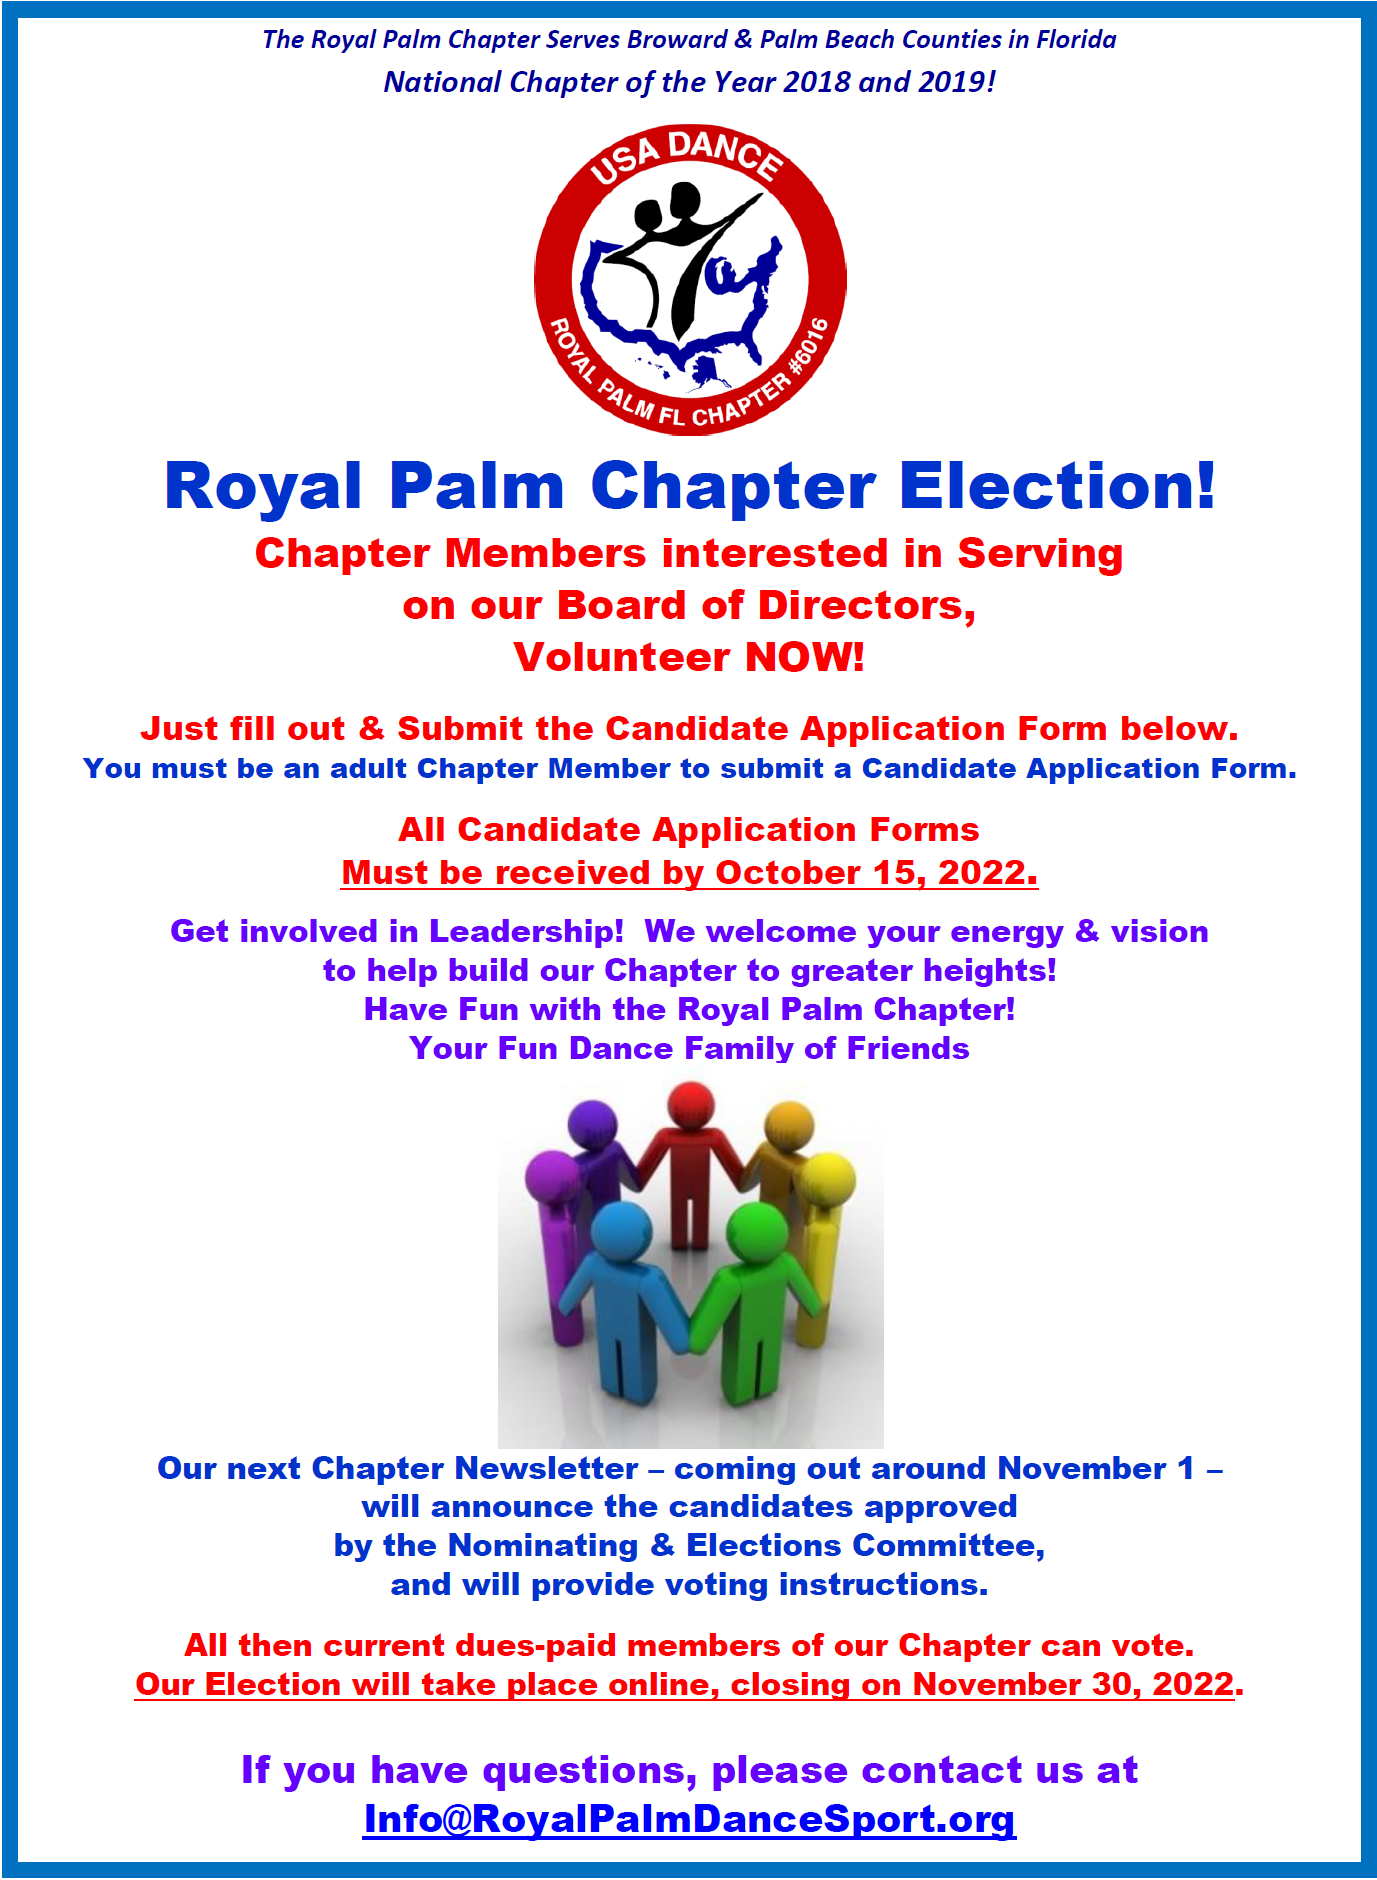 Royal Palm Chapter Election - Flyer for Candidate Application Form